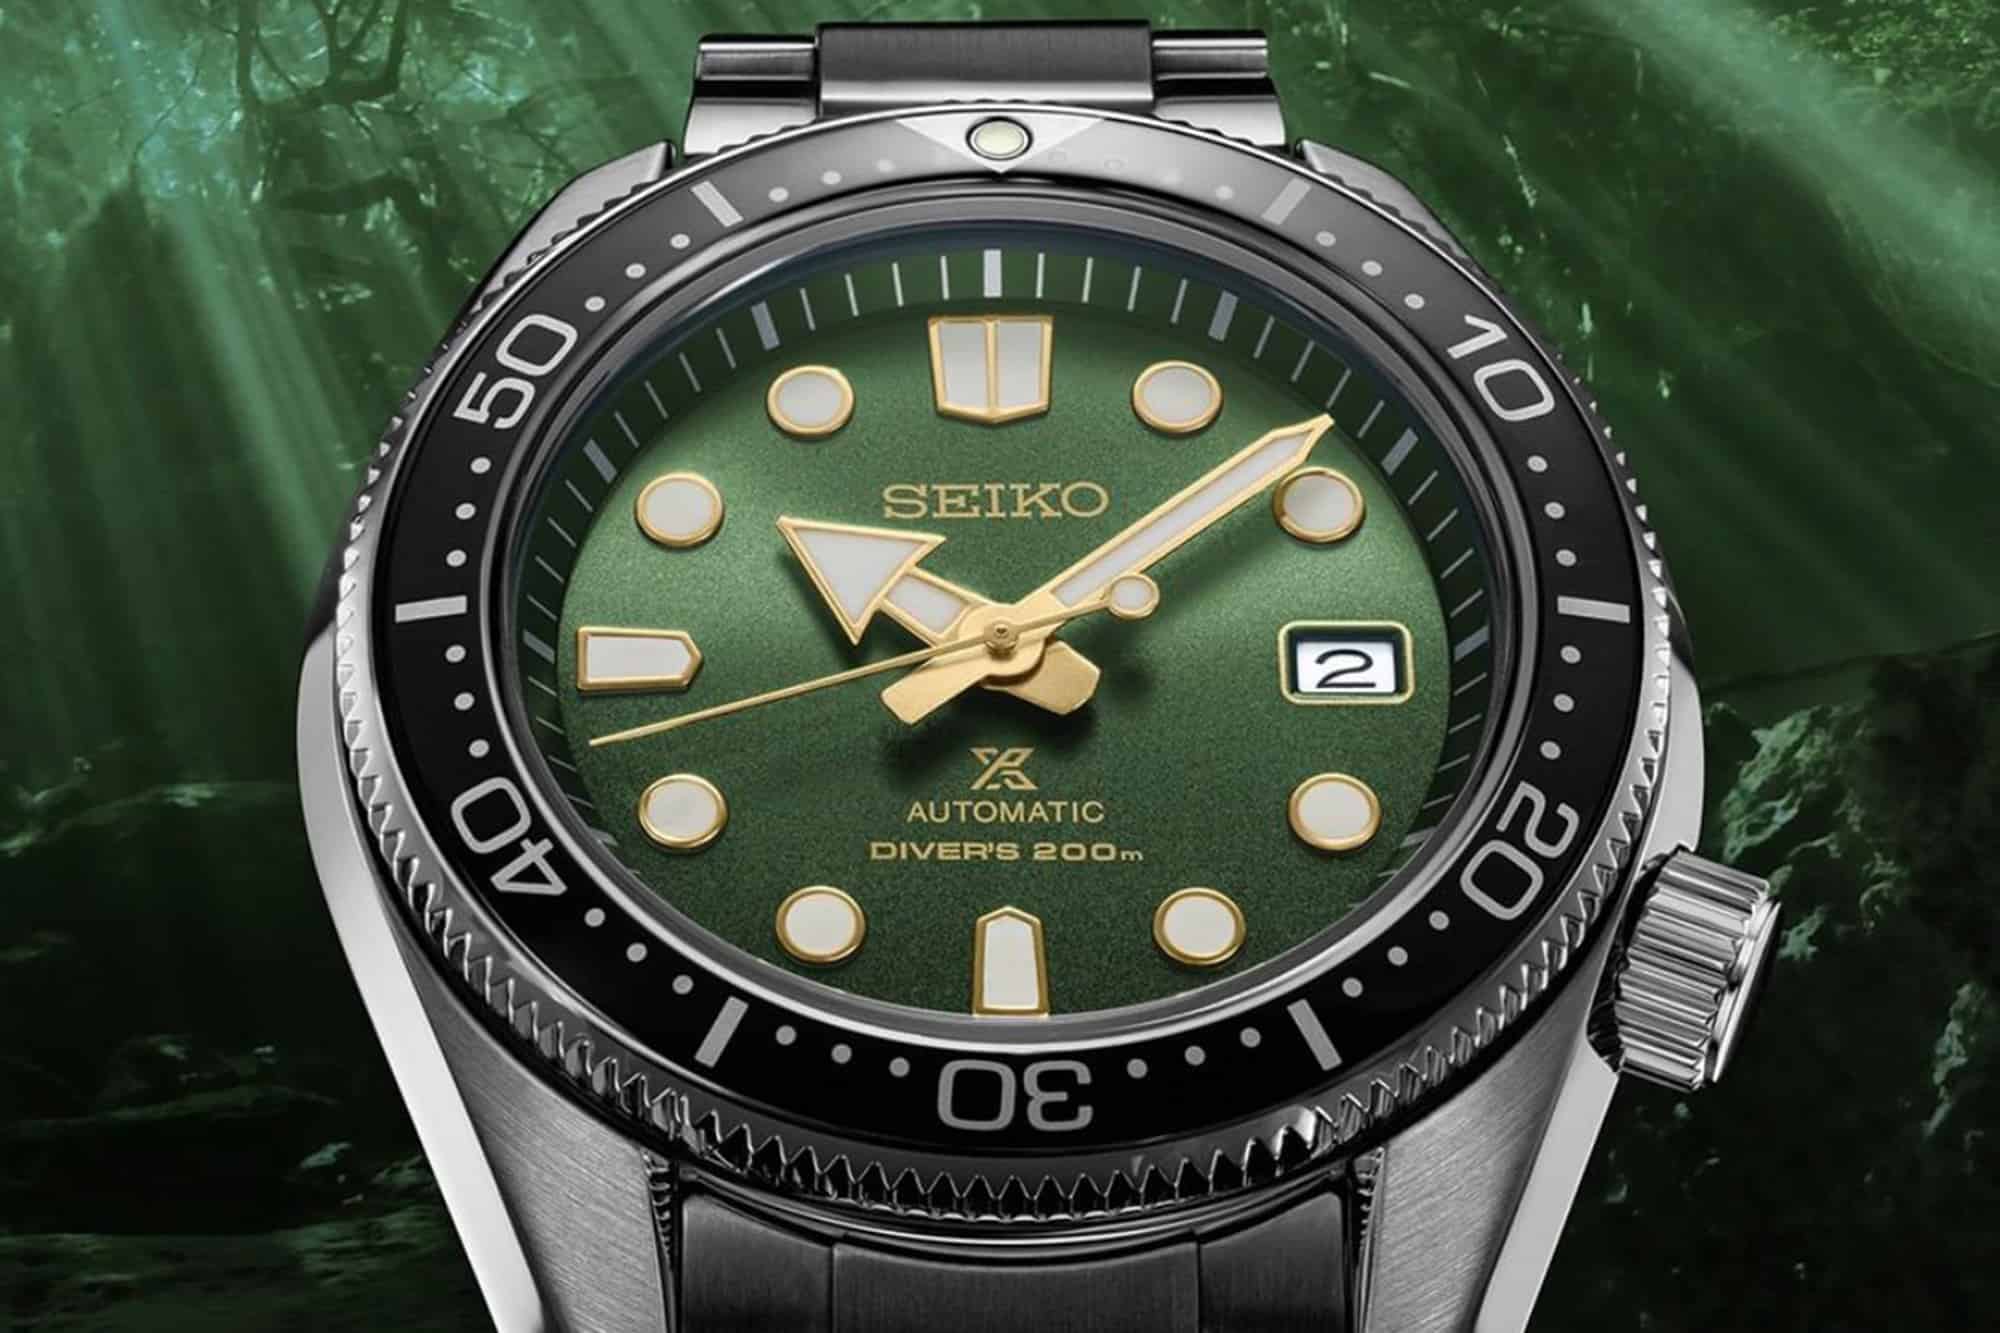 Introducing the Seiko Prospex 200m Diver Ref. SPB105 with Green Dial and  Gold Accents - Worn & Wound